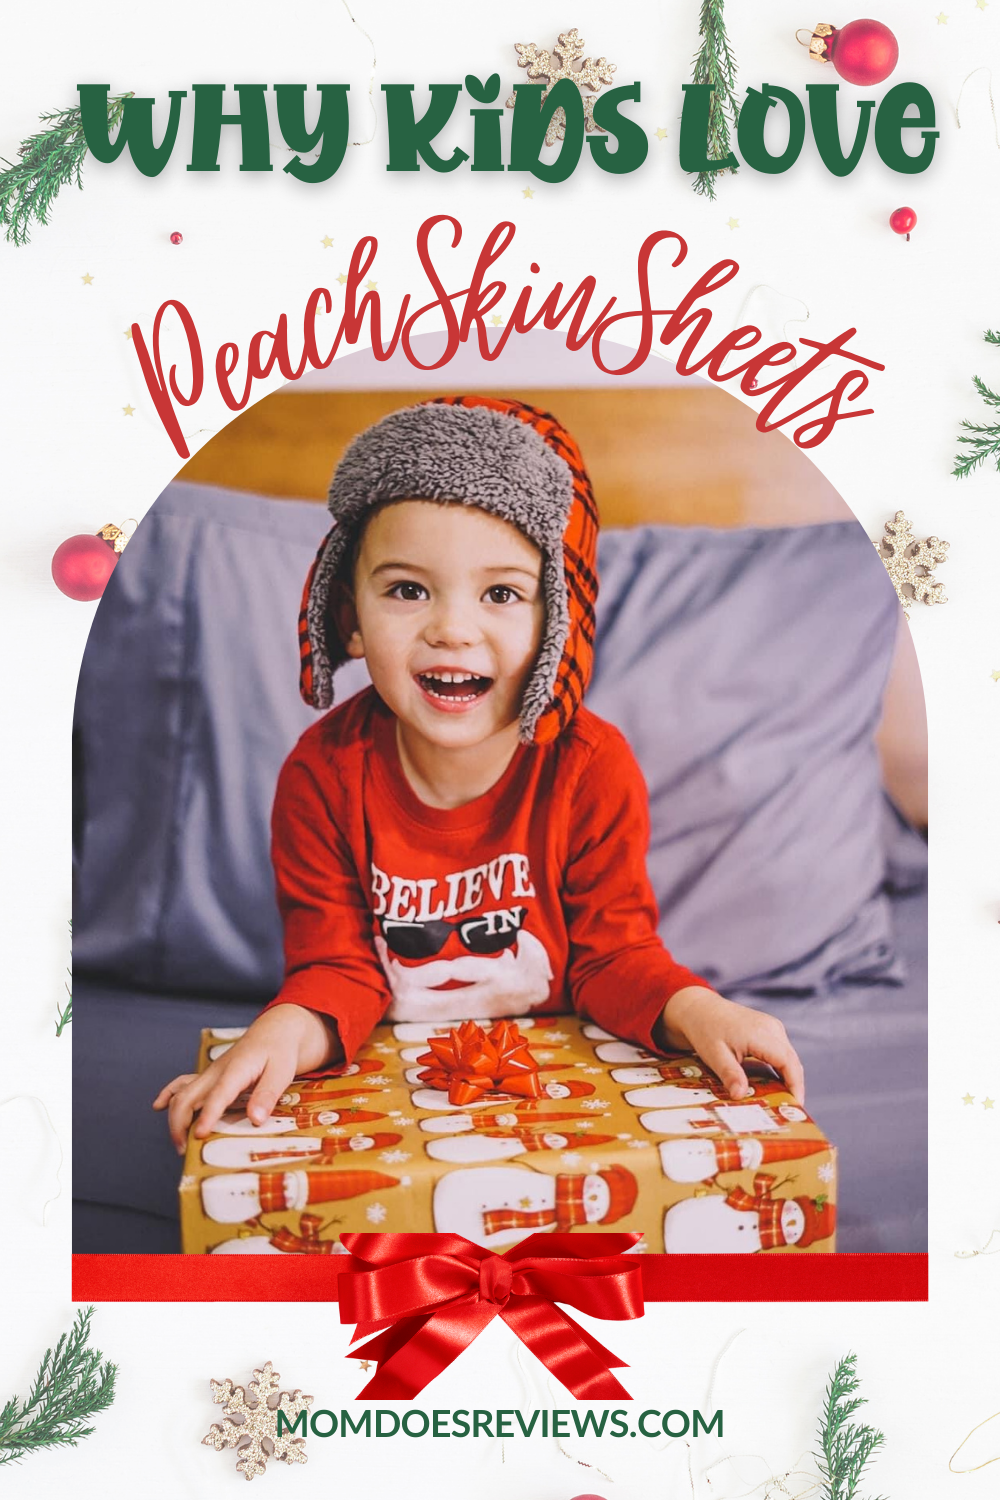 5 Reasons Your Kids will Love PeachSkinSheets!